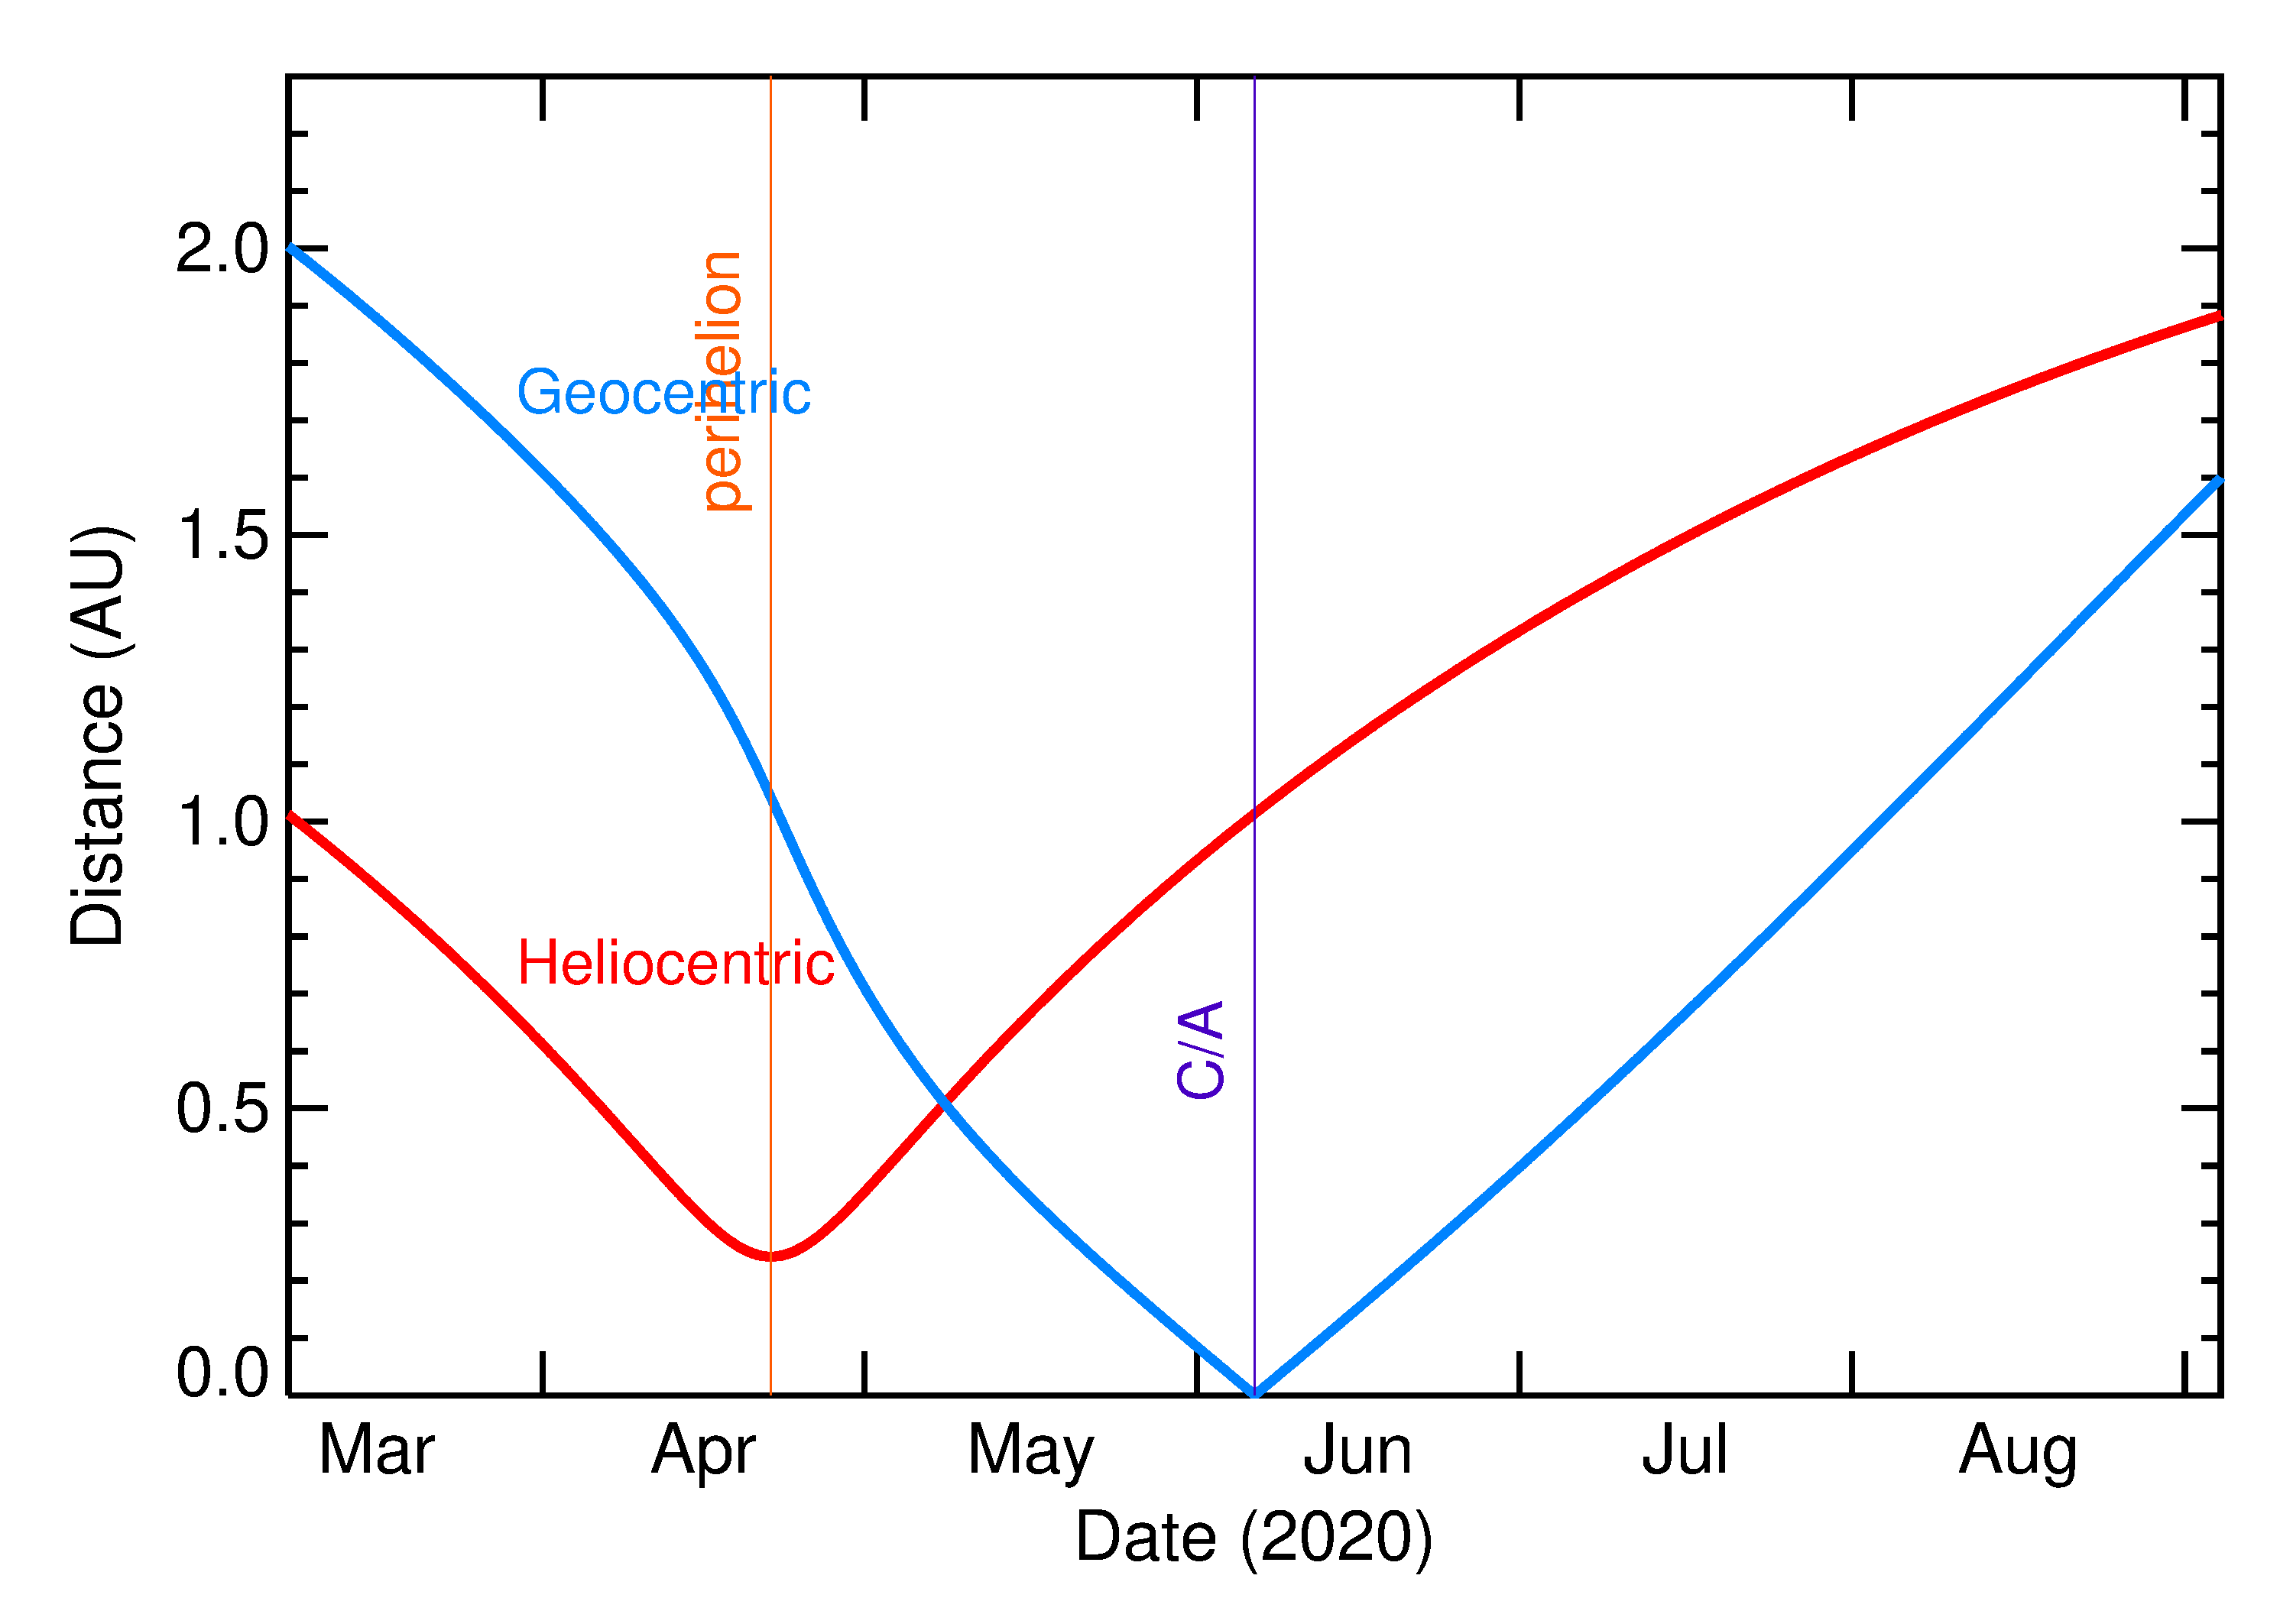 Heliocentric and Geocentric Distances of 2020 LD in the months around closest approach